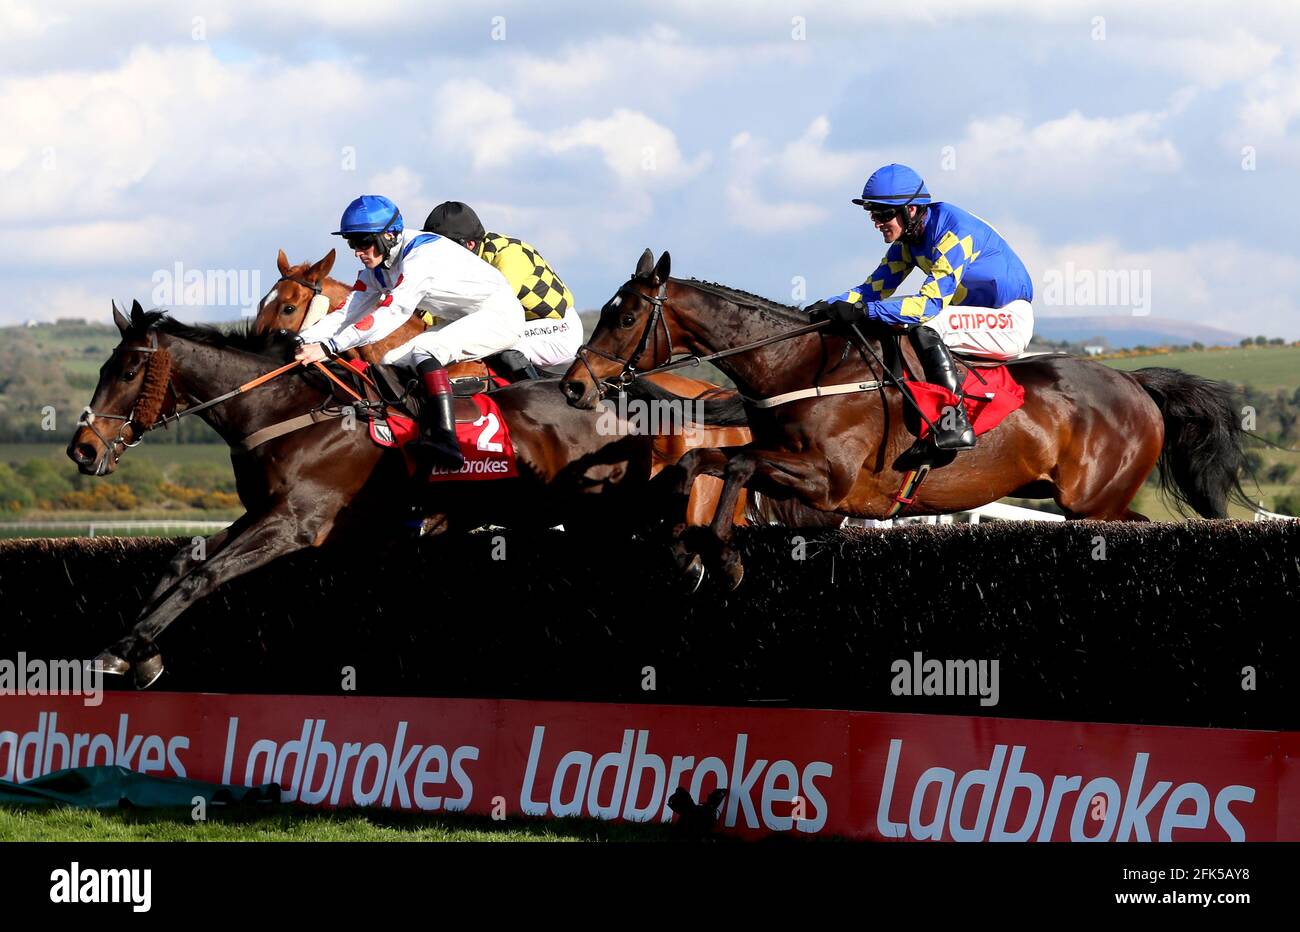 Clan Des Obeaux ridden by Sam Twiston-Davies (left) goes on to win The Ladbrokes Punchestown Gold Cup during day two of the Punchestown Festival at Punchestown Racecourse in County Kildare, Ireland. Issue date: Wednesday April 28, 2021. Stock Photo